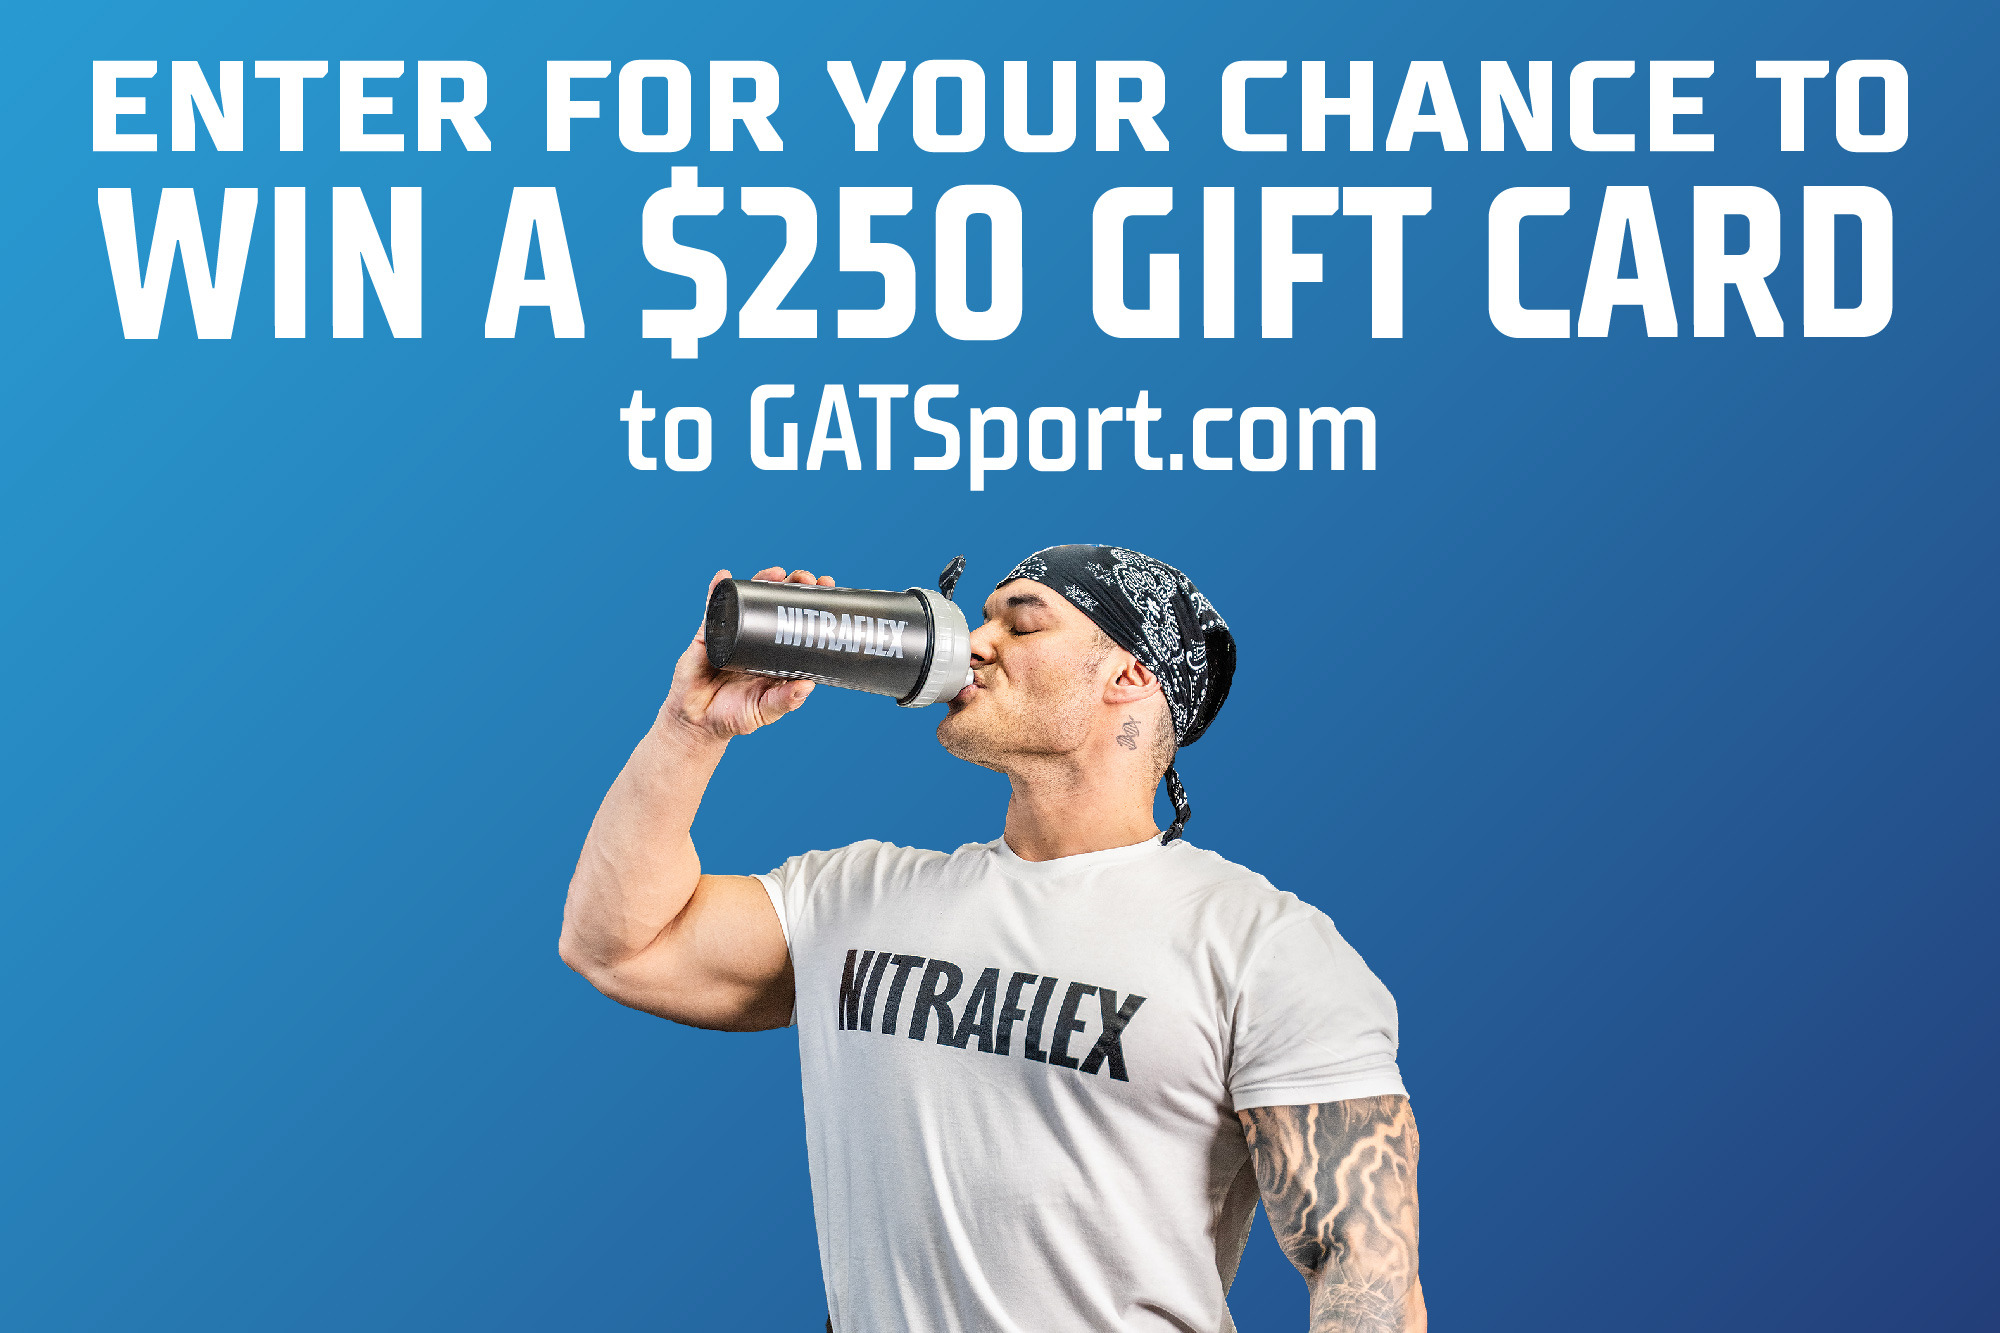 Enter for your chance to win a $250 gift card to GATSport.com